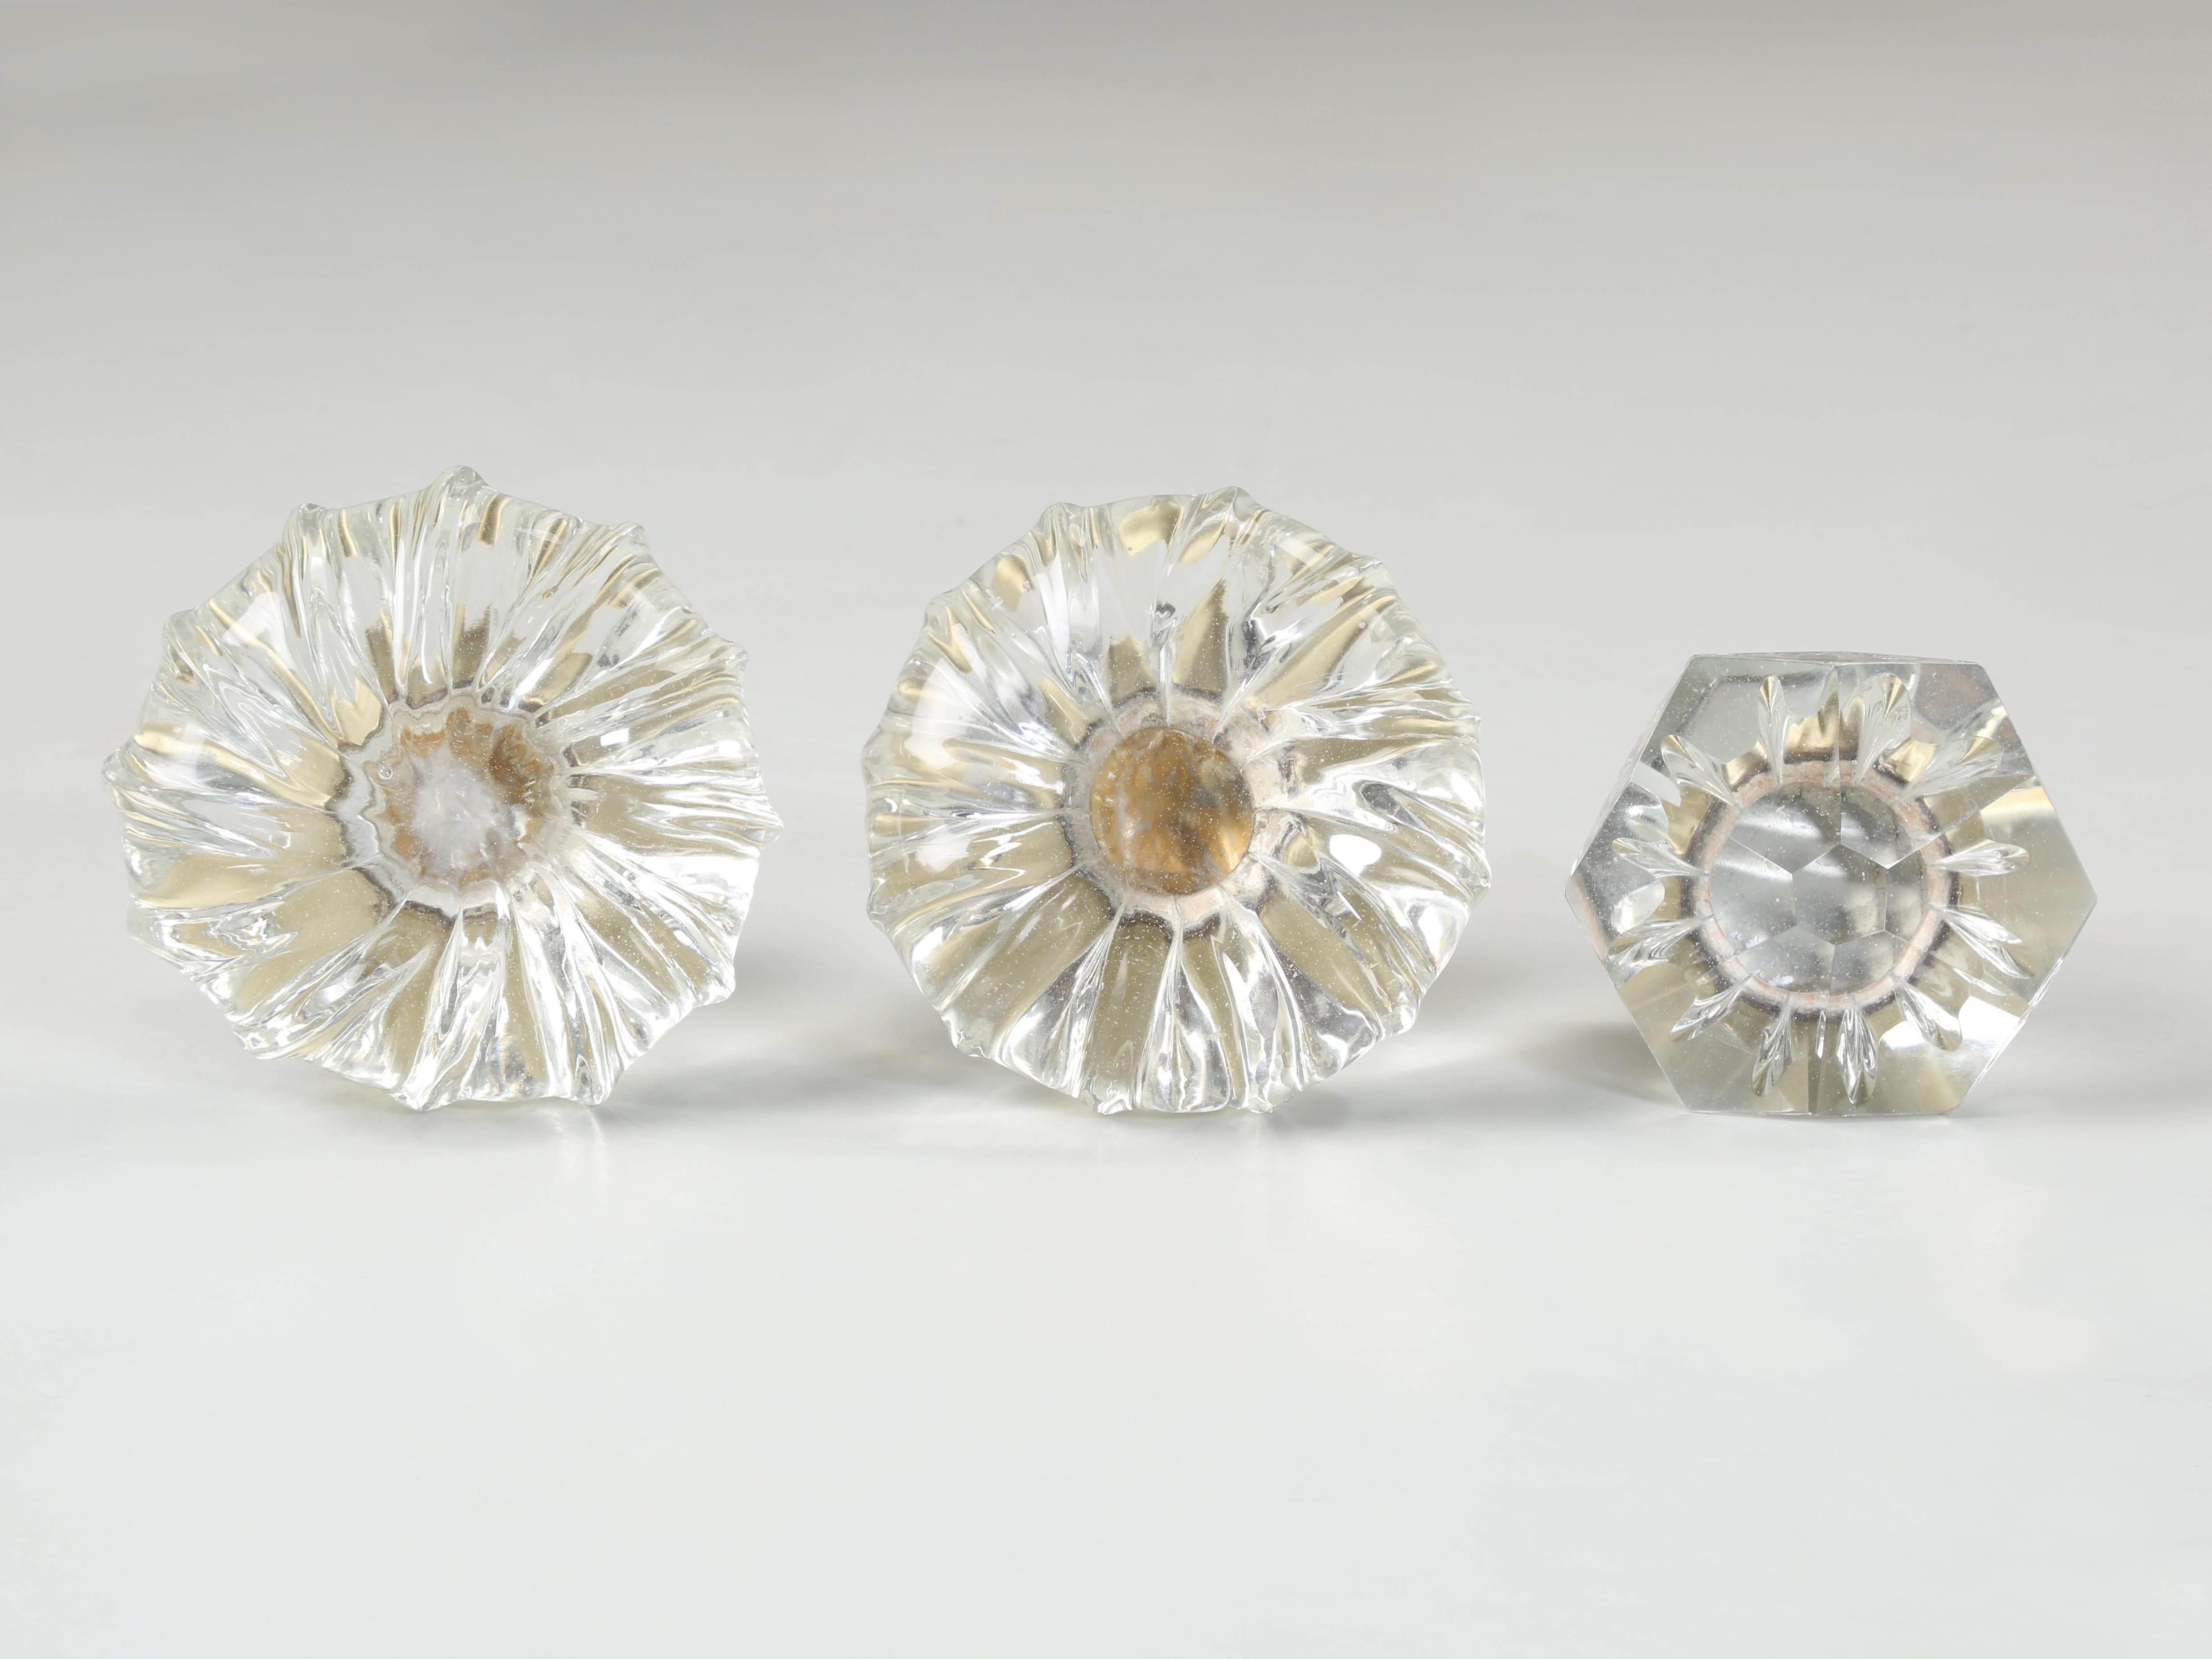 Antique Collection of (3) magnificent Crystal Door Pulls, Knobs or Curtain Tie-Backs. We seem to all have a different opinion as to what they were originally used for, whether they were curtain tie-backs or oversize door pulls or door knobs.